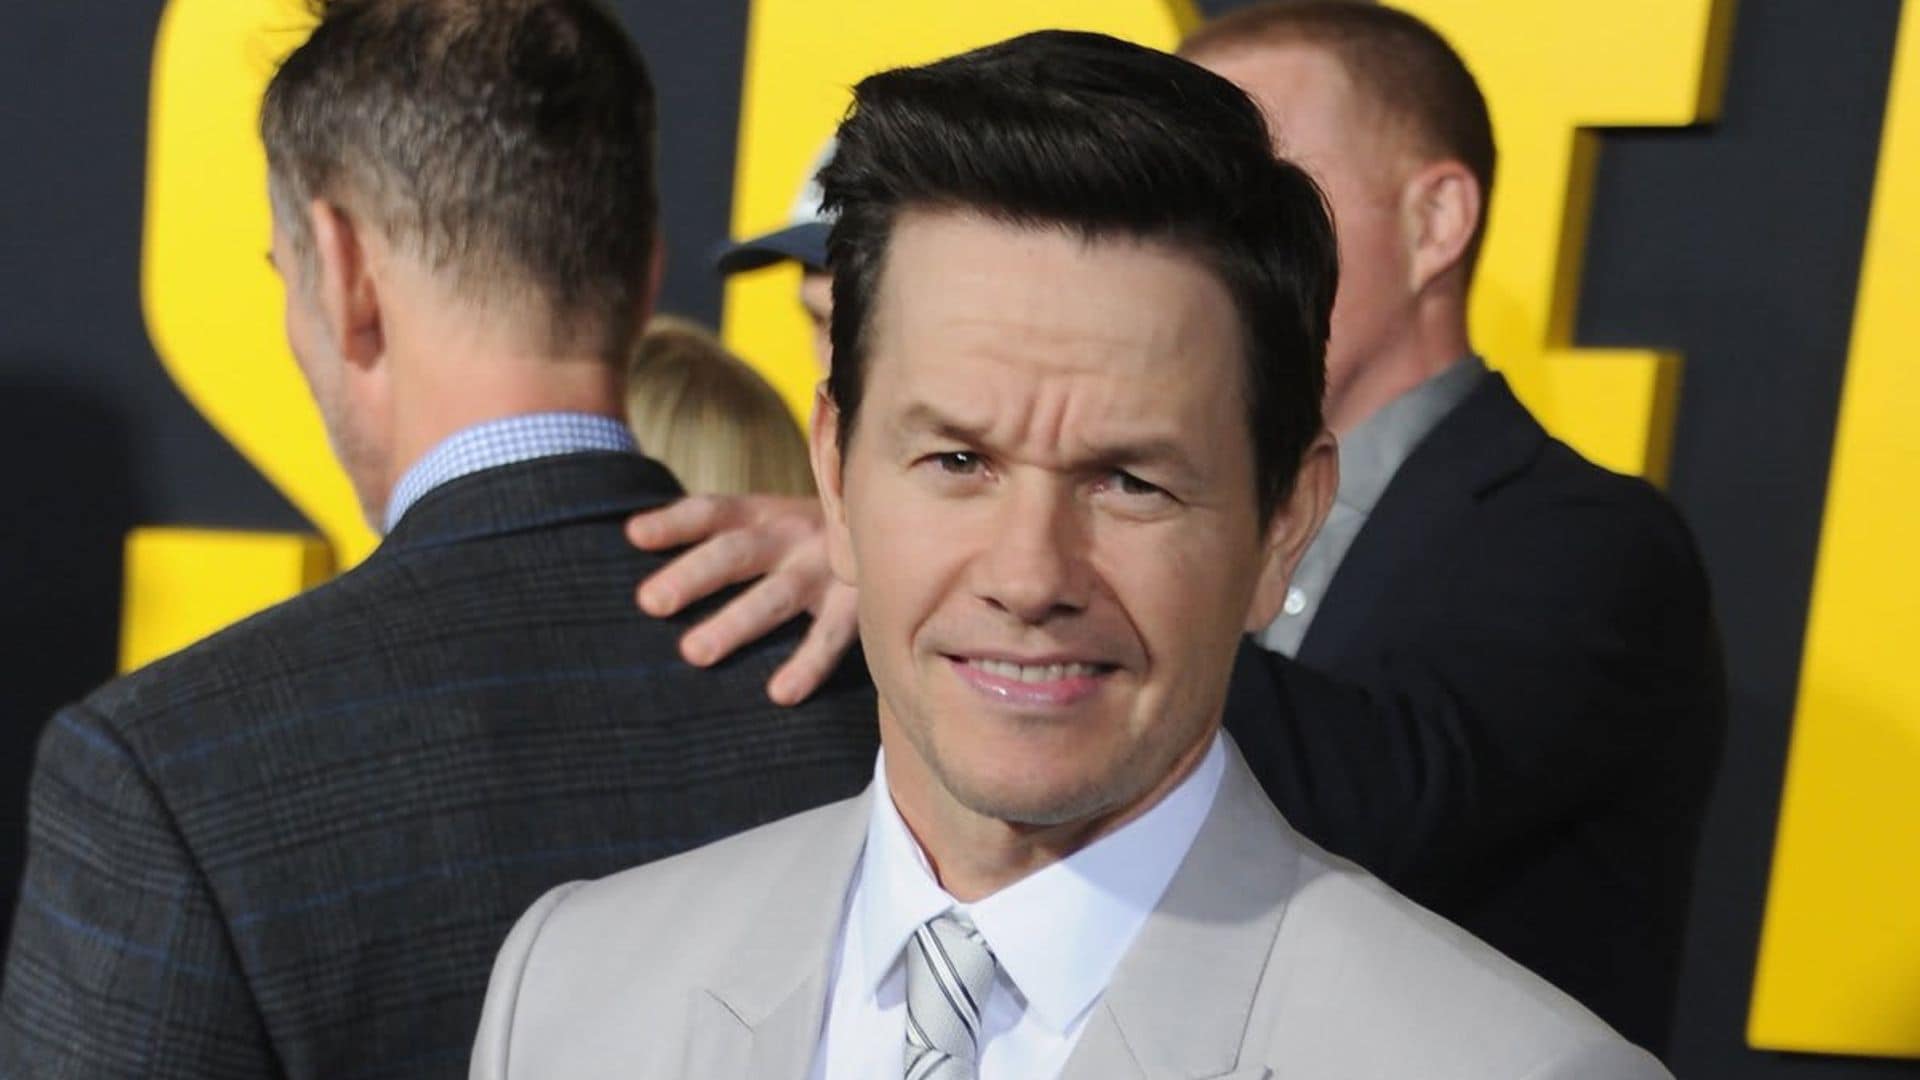 Mark Wahlberg works out shirtless at an hour when everyone else is sleeping